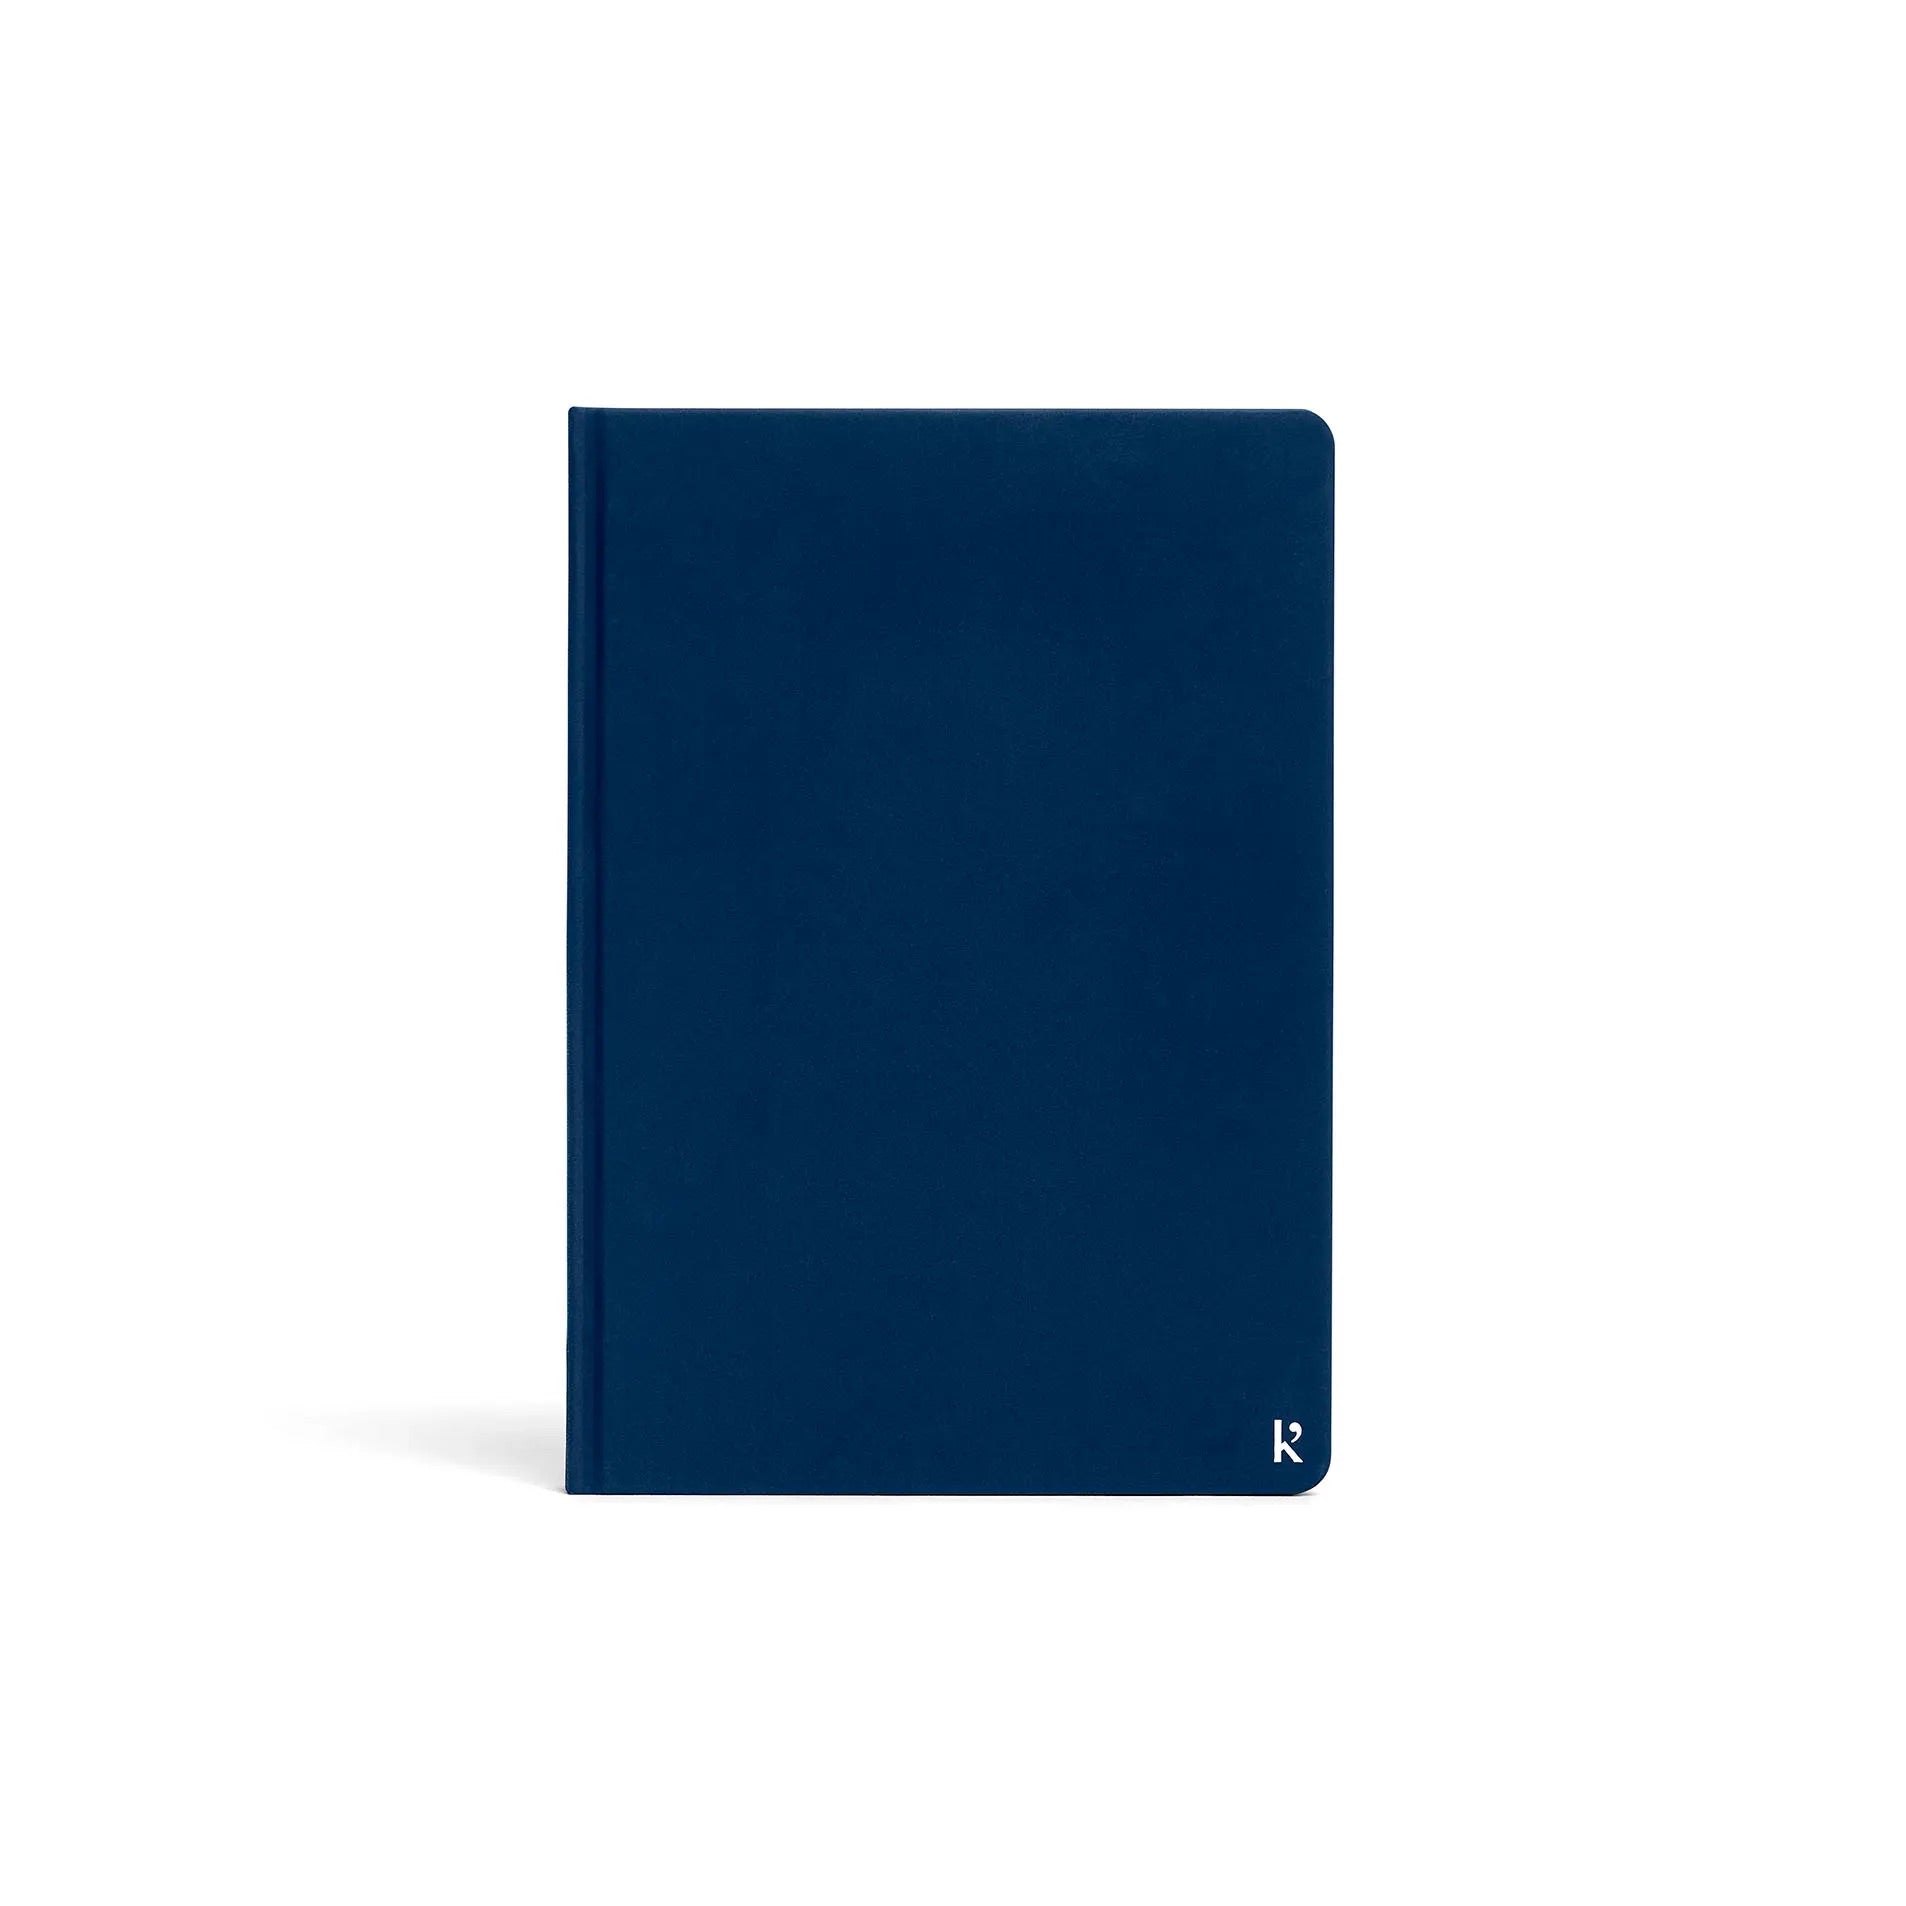 stone paper blank notebook